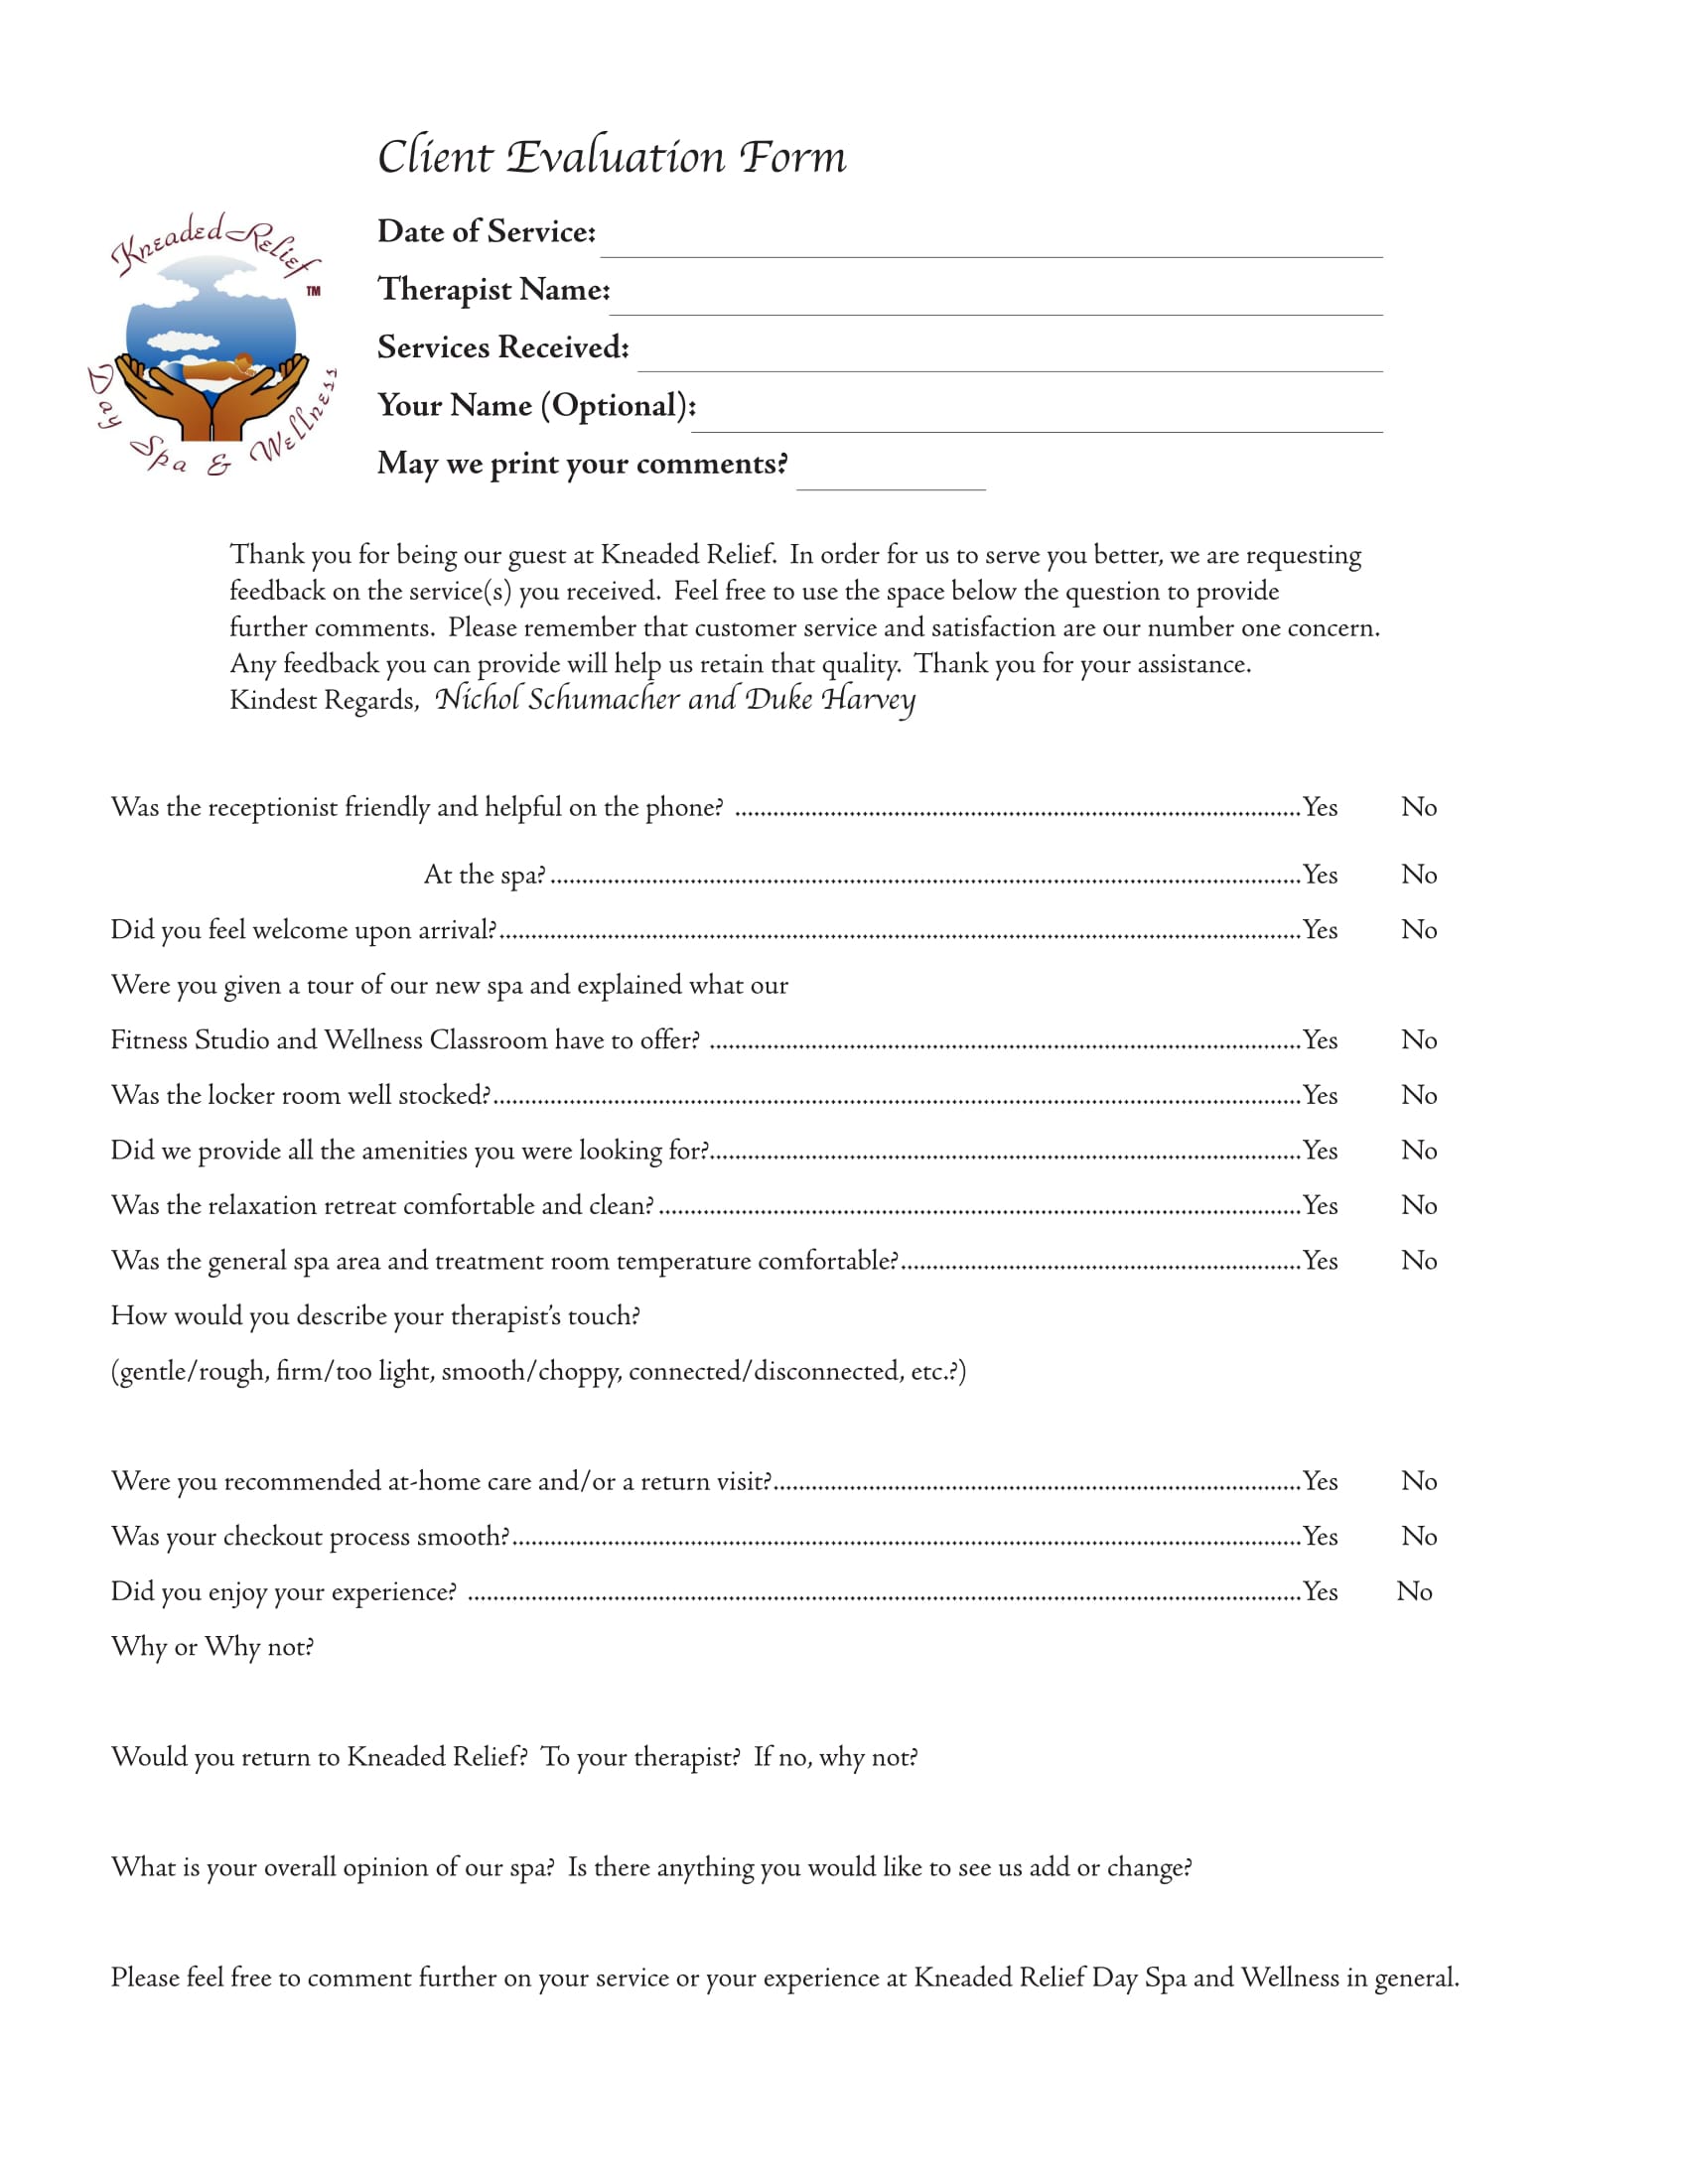 Free 14 Customer Service Evaluation Forms In Pdf 6604